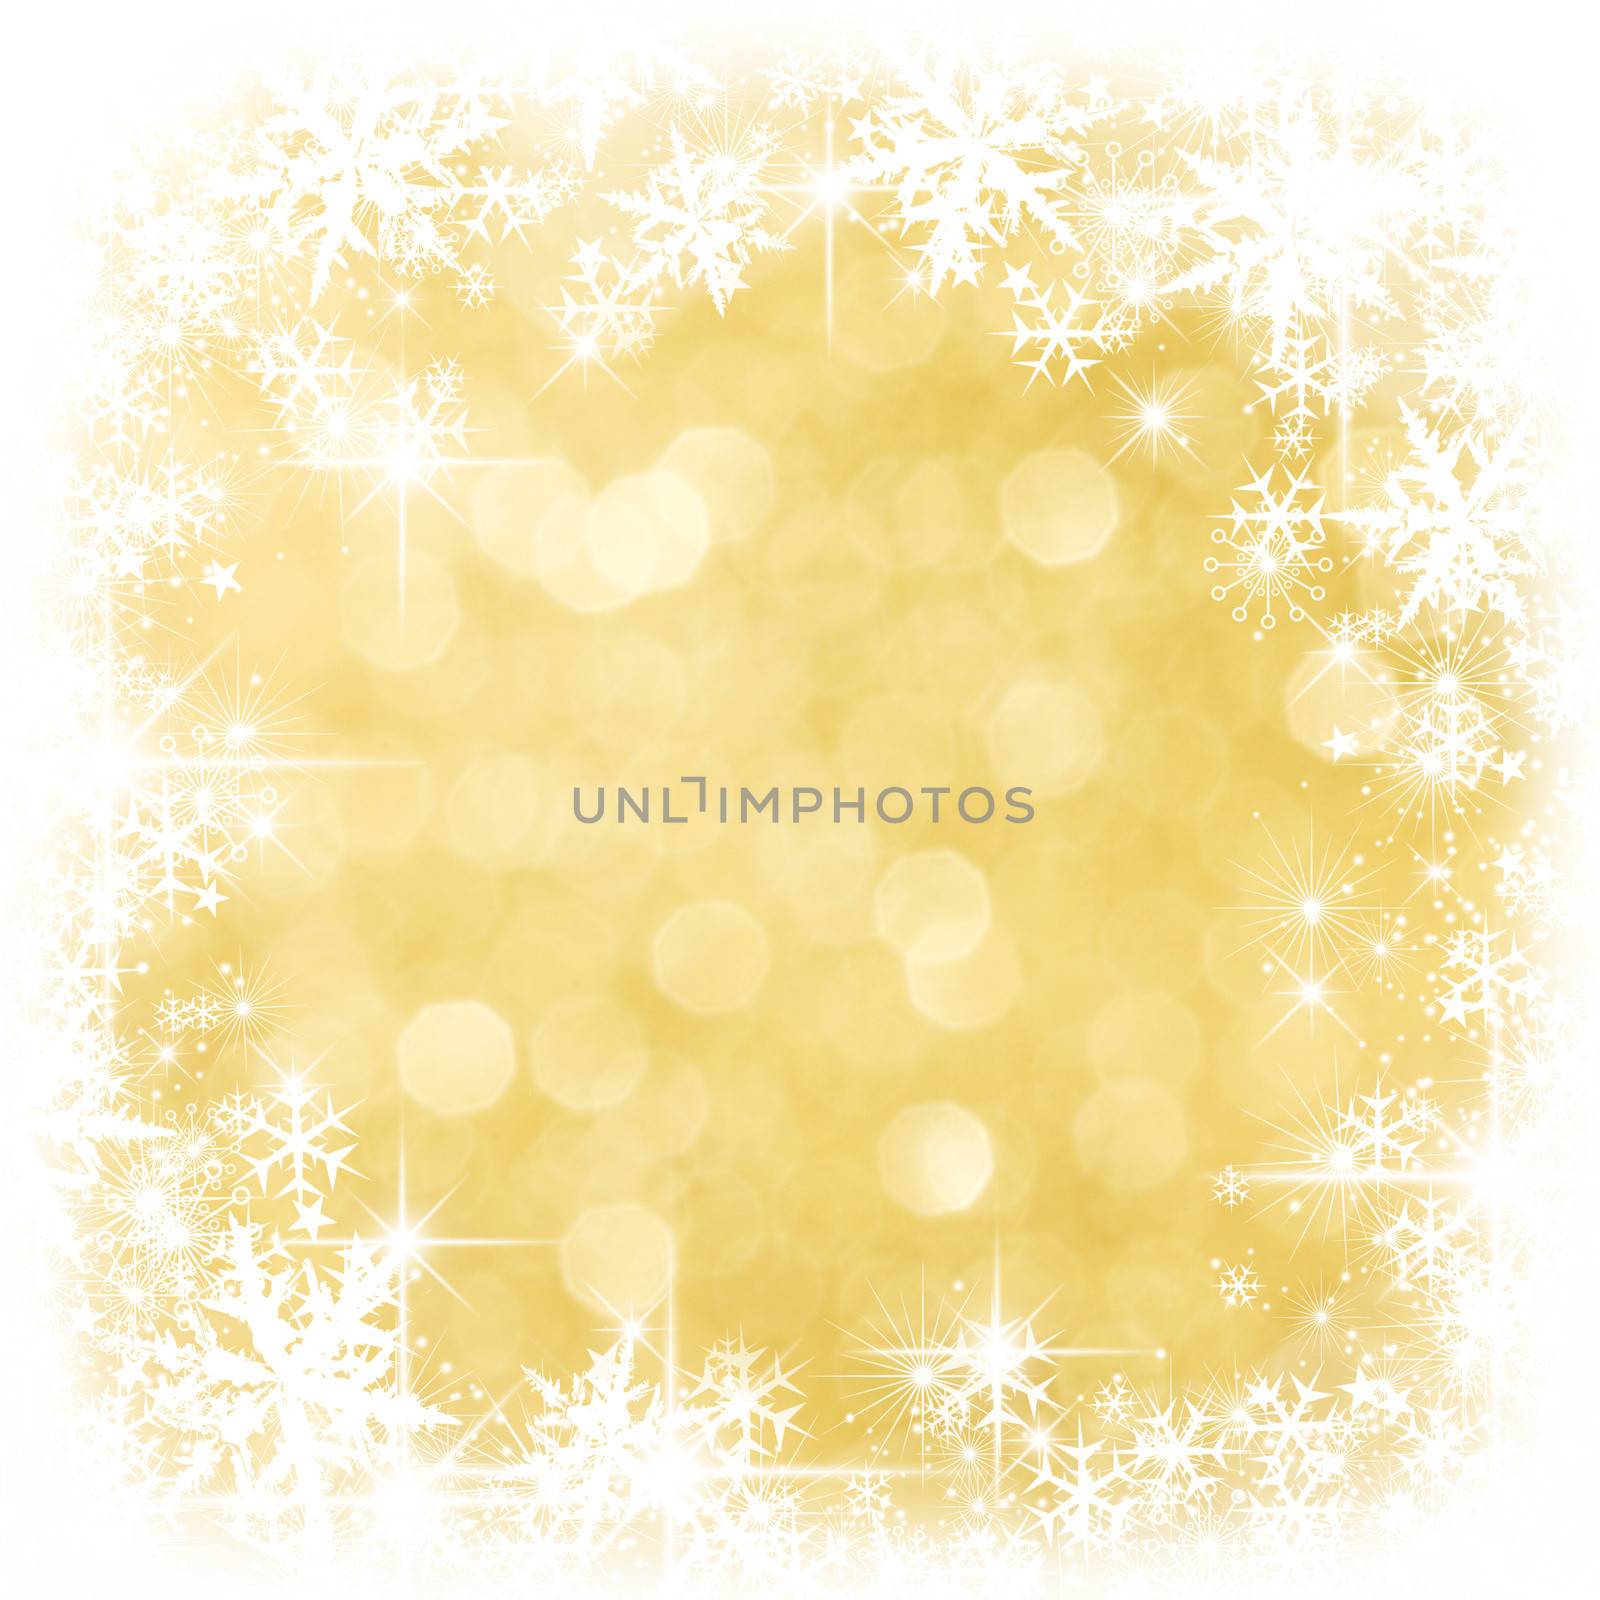 Golden shiny stars and snowflakes christmas bokeh background